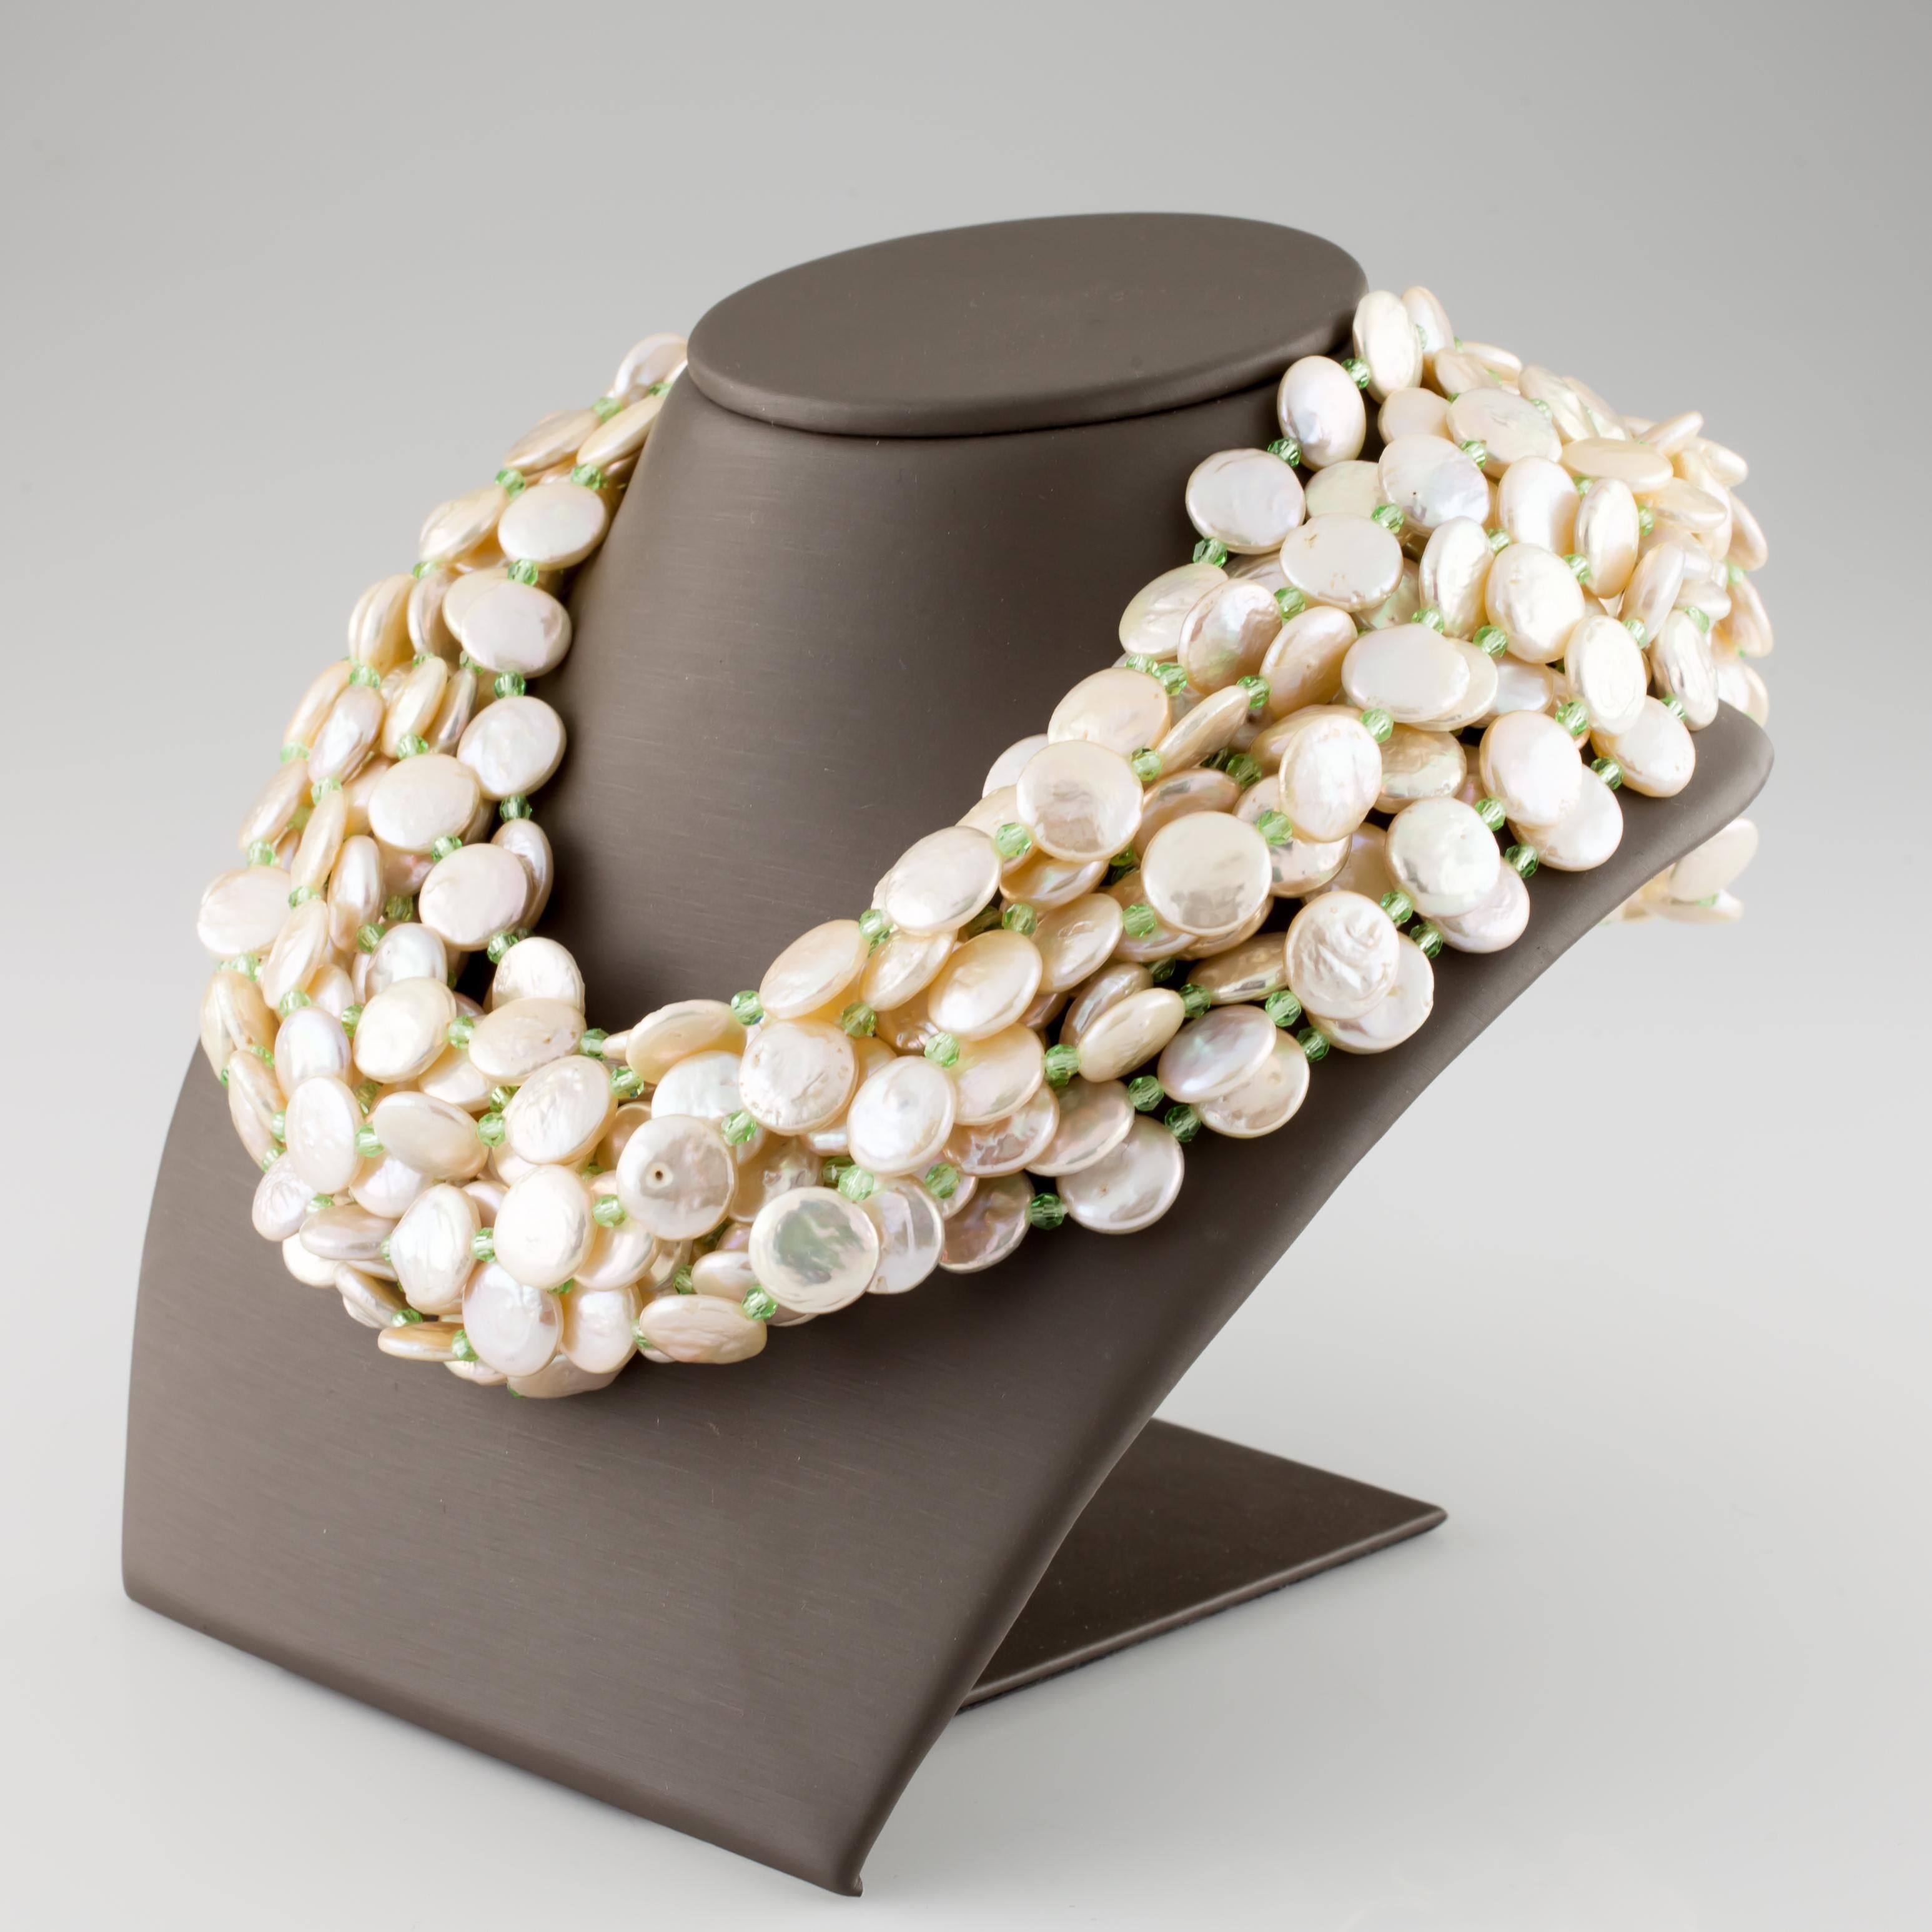 Amazing Multi-Strand Pearl Necklace by Cristina Ferrare
Features 11 strands of coin pearls interspersed w/ small briolette-cut green stones
Approximate diameter of coin pearls = 10 - 11 mm
Includes 18k Yellow- and White-Gold Clasp
Total Length =